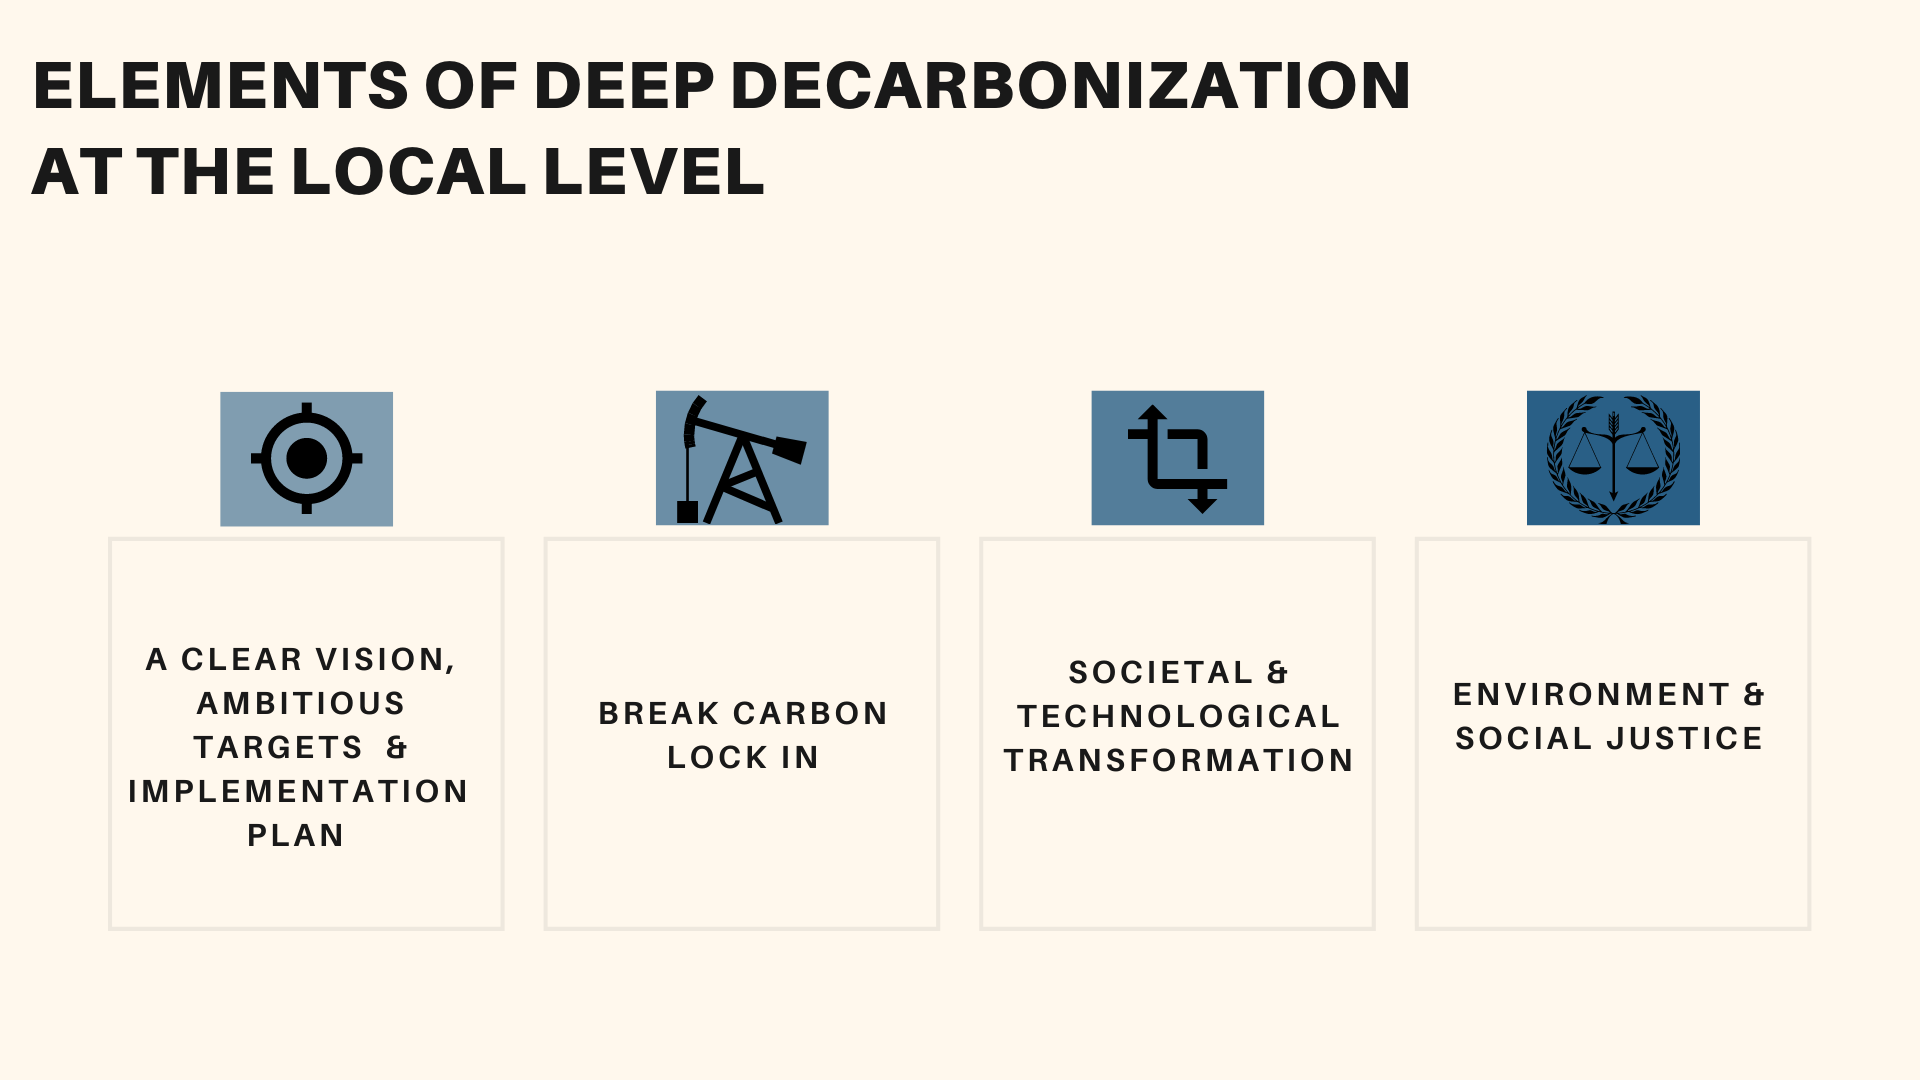 Elements of Deep Decarbonization at the Local Level